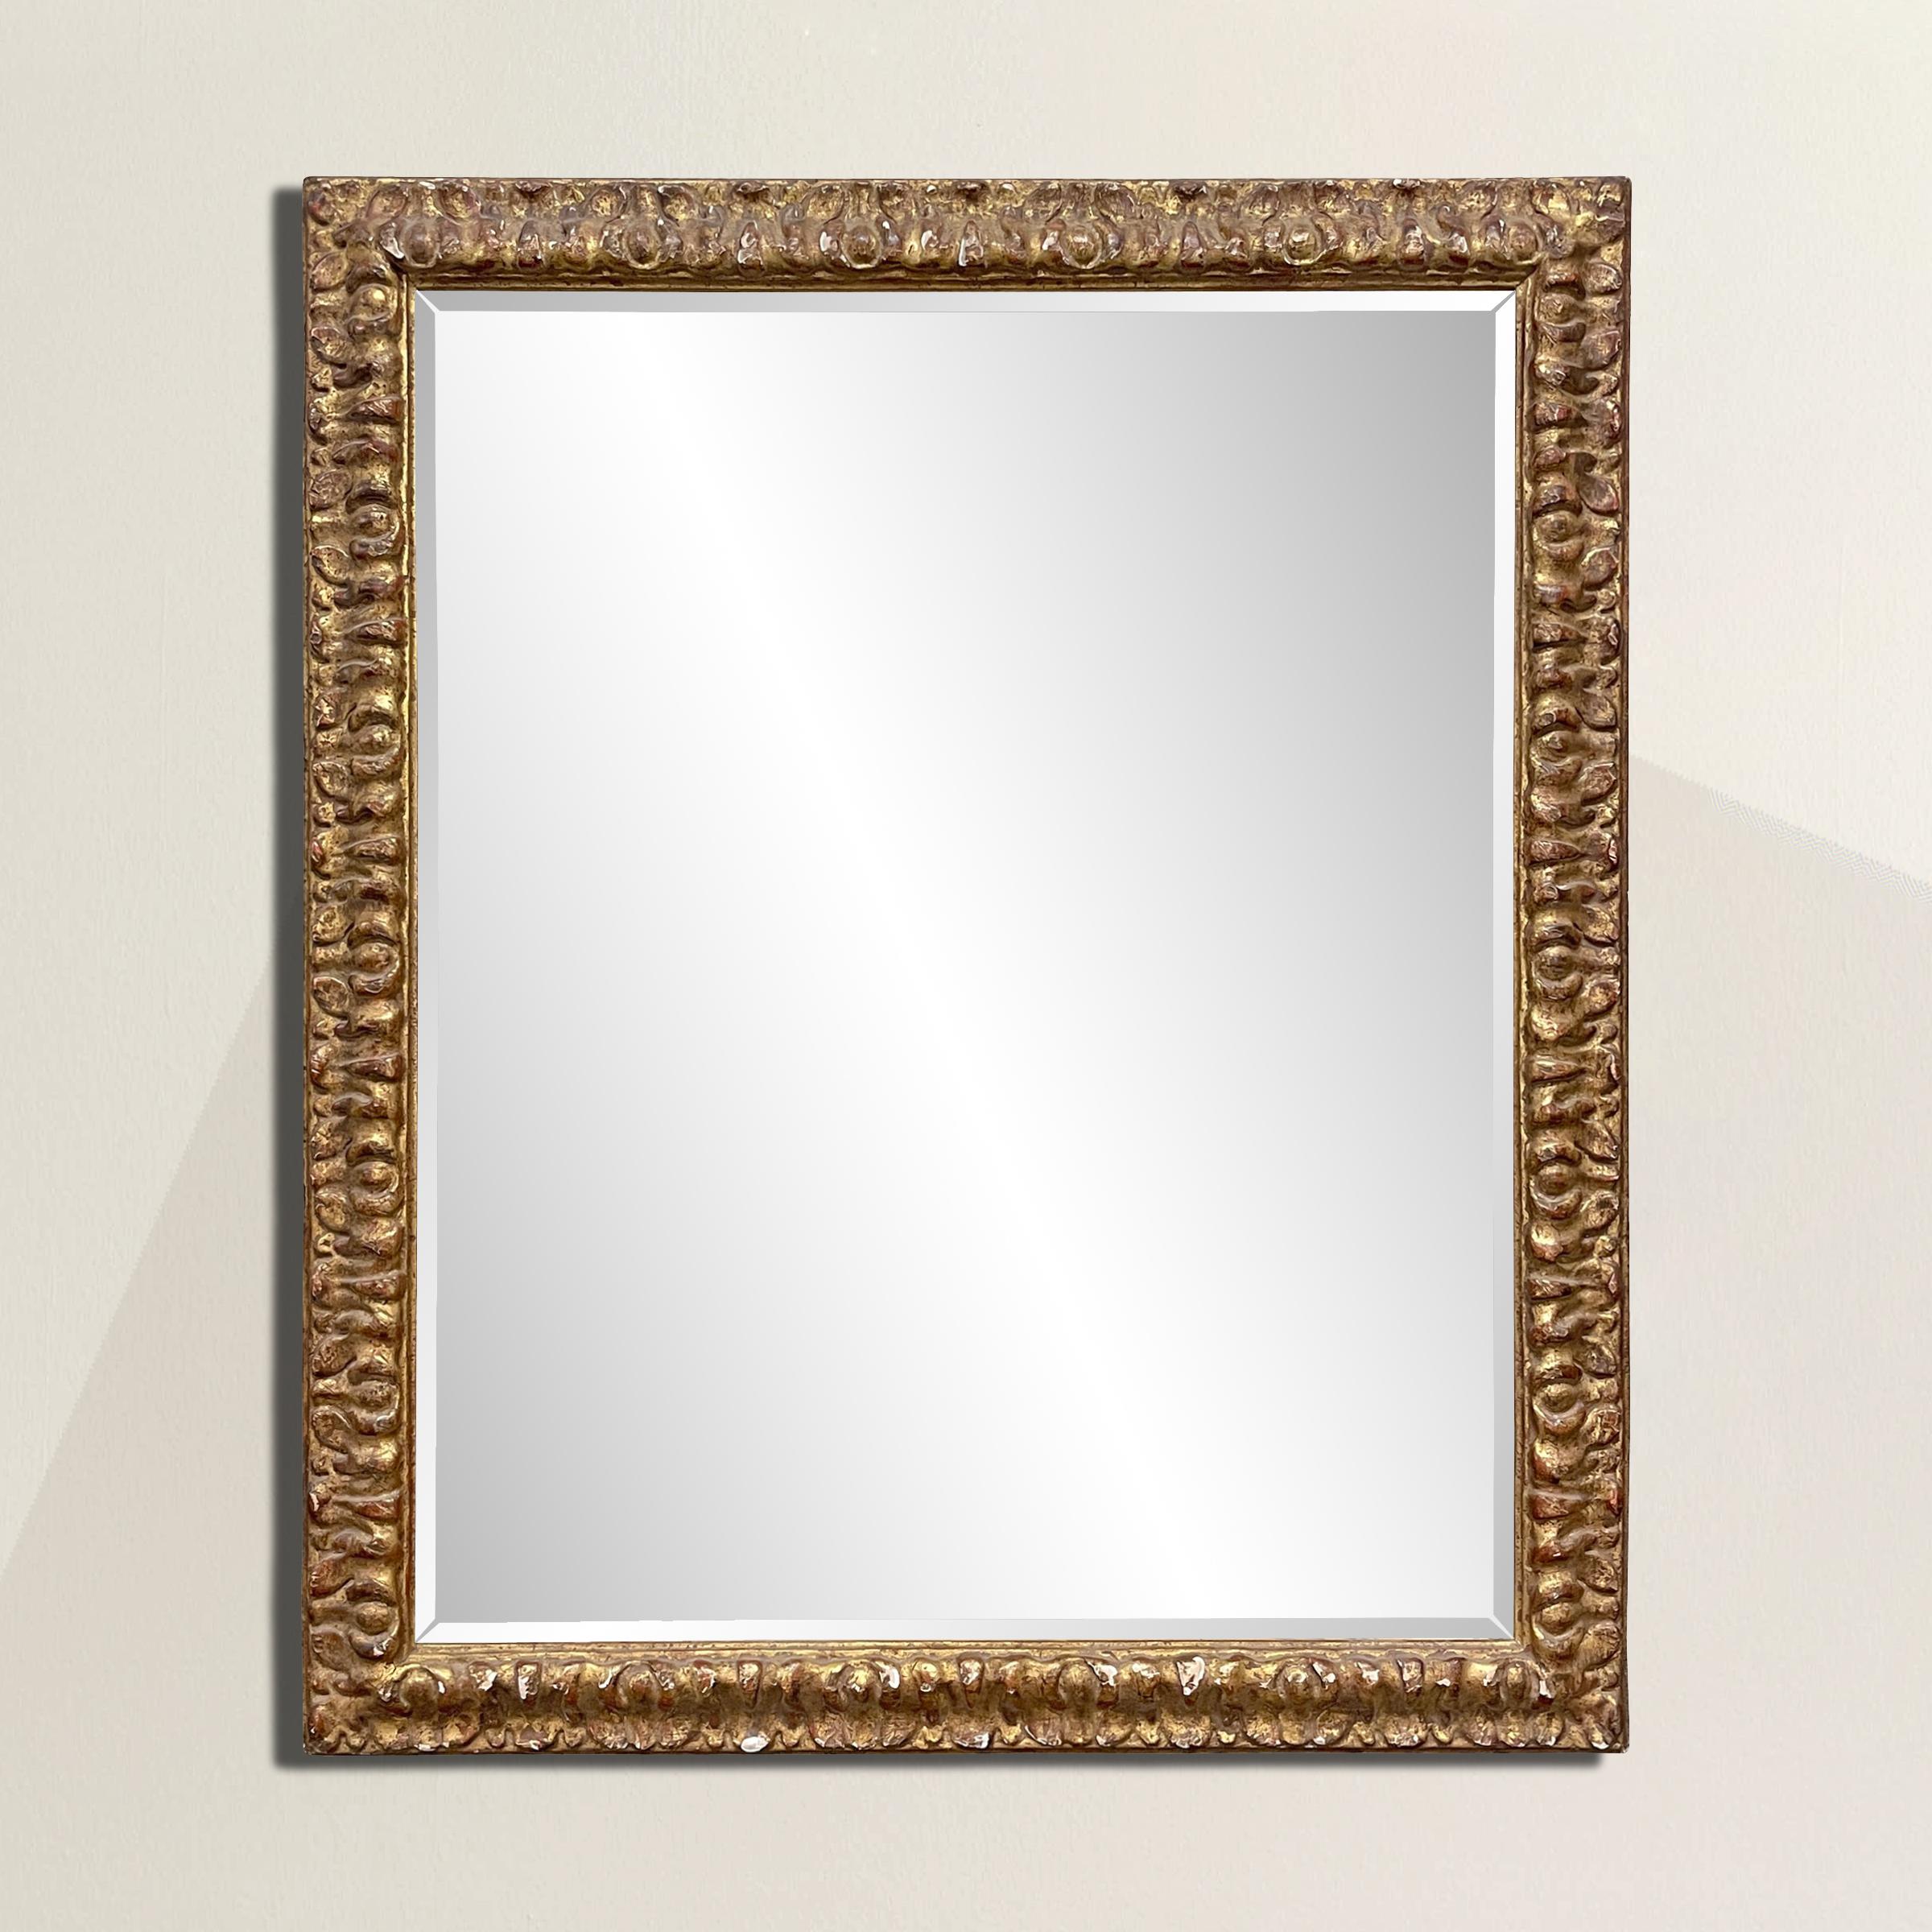 A notable and commanding 19th century Florentine gilt carved wood frame with a stylized floral motif, and a newer beveled mirror. The perfect mirror for over your entry console table, fireplace mantel, or in a bedroom.